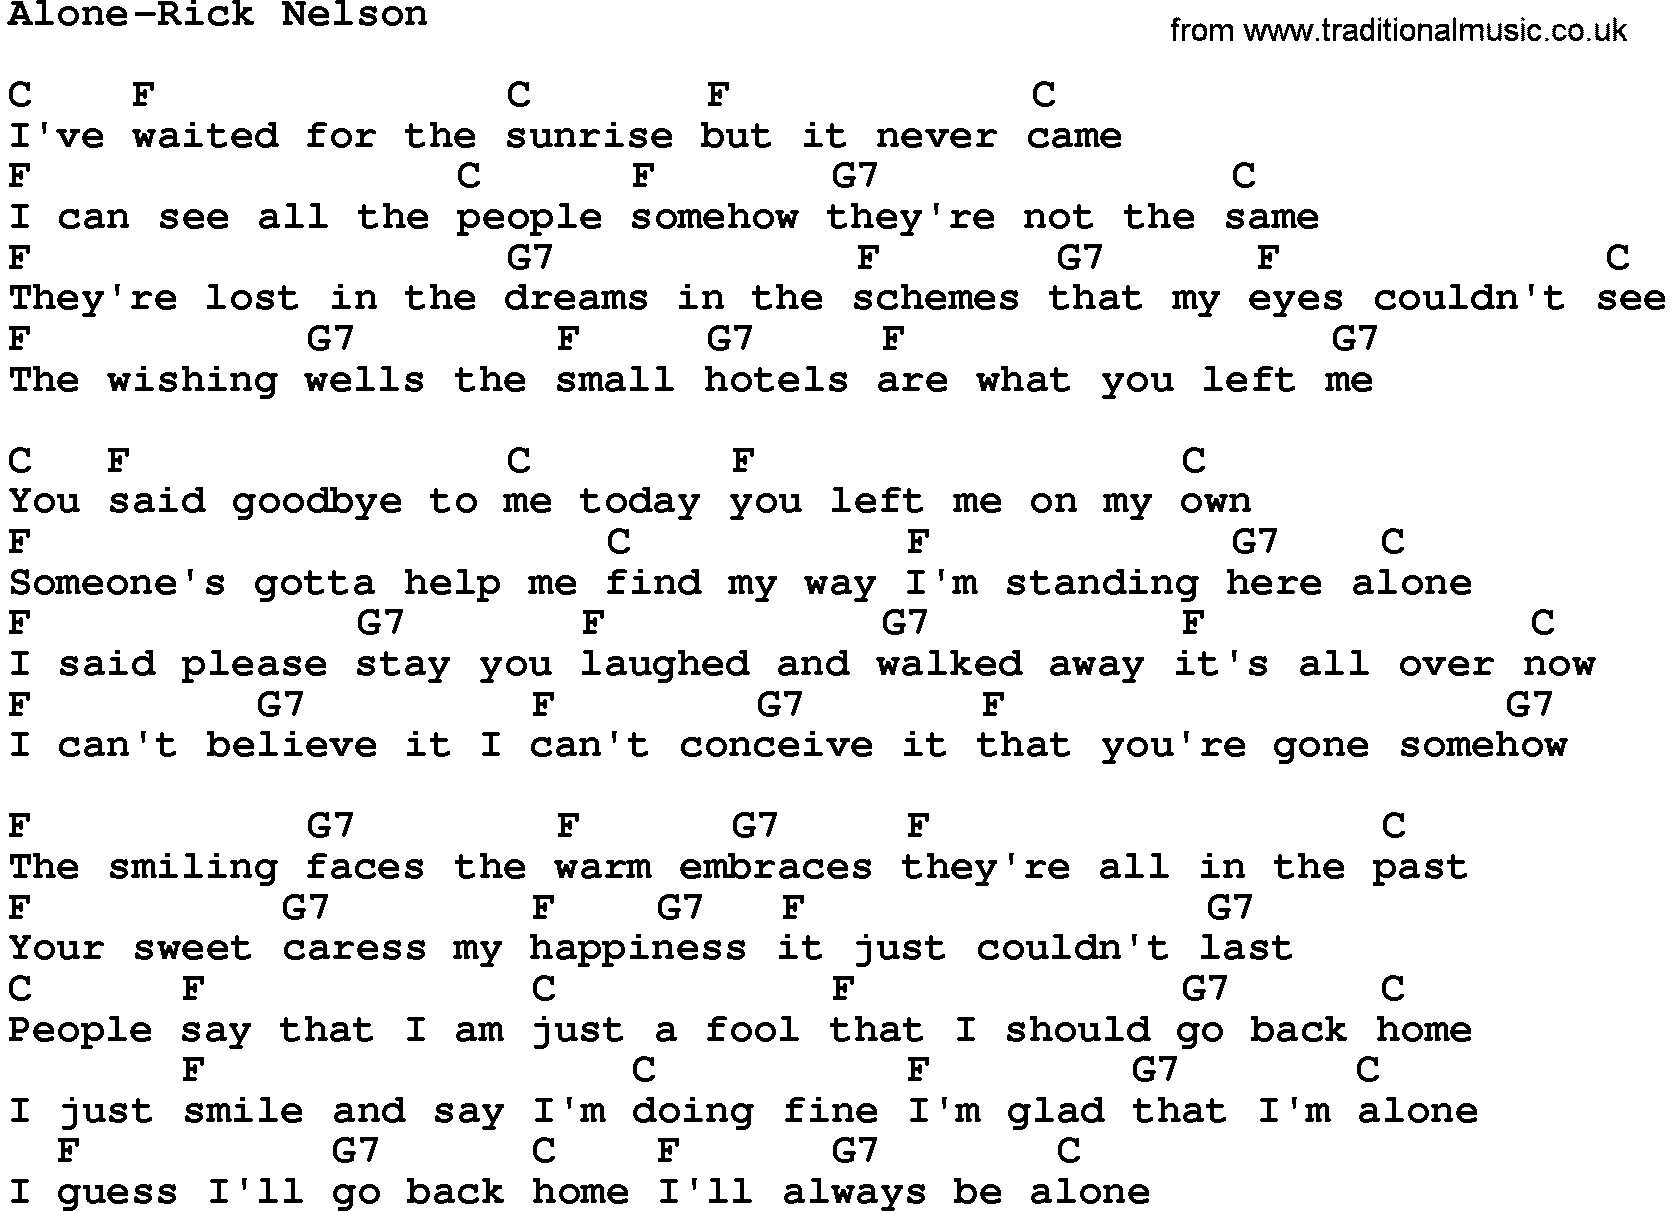 Country music song: Alone-Rick Nelson lyrics and chords